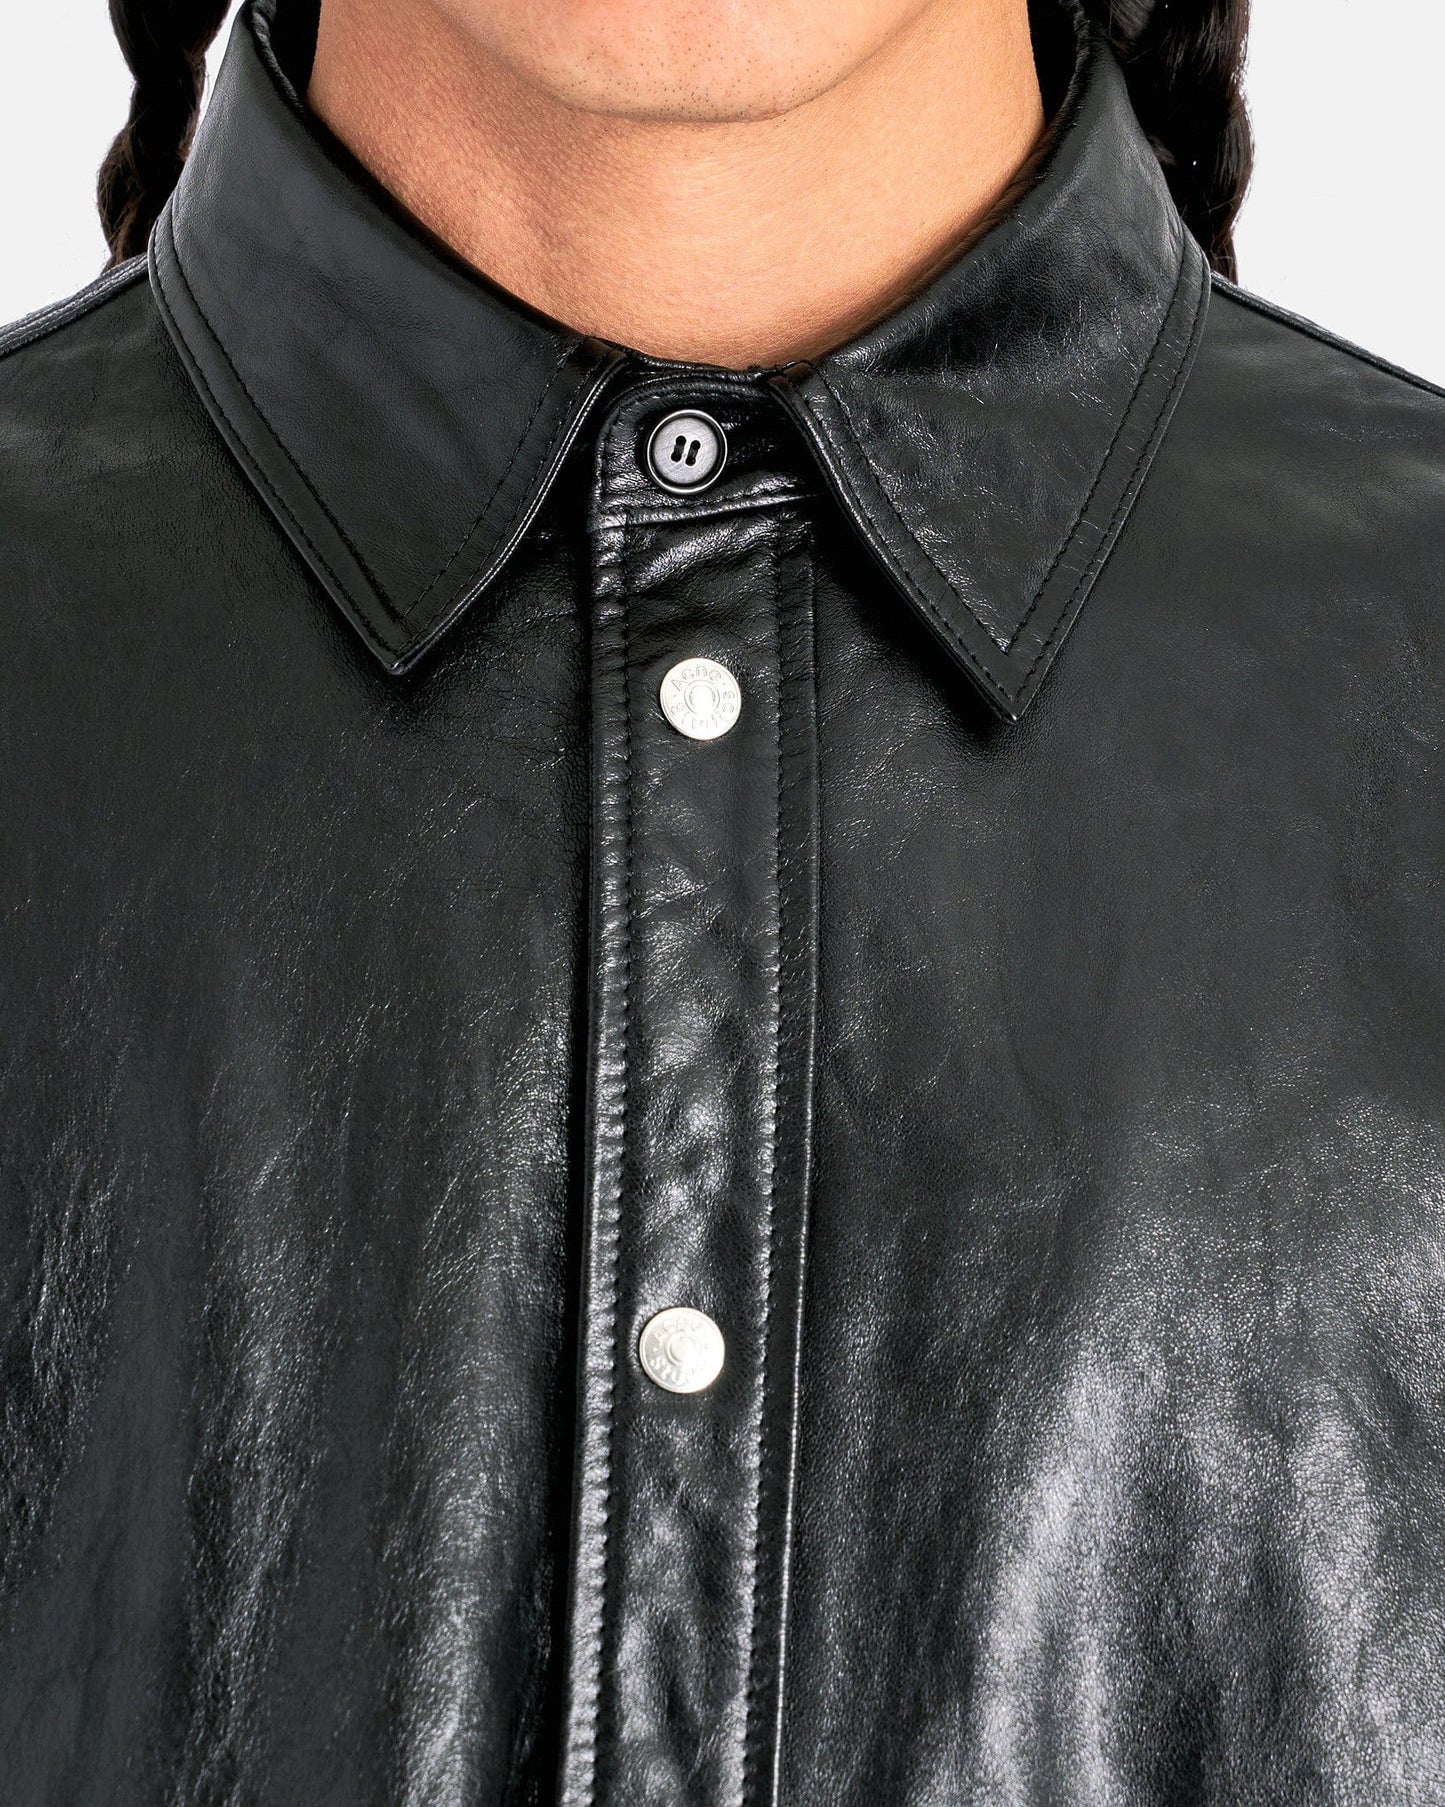 Acne Studios Men's Shirts Leather Outershirt in Black